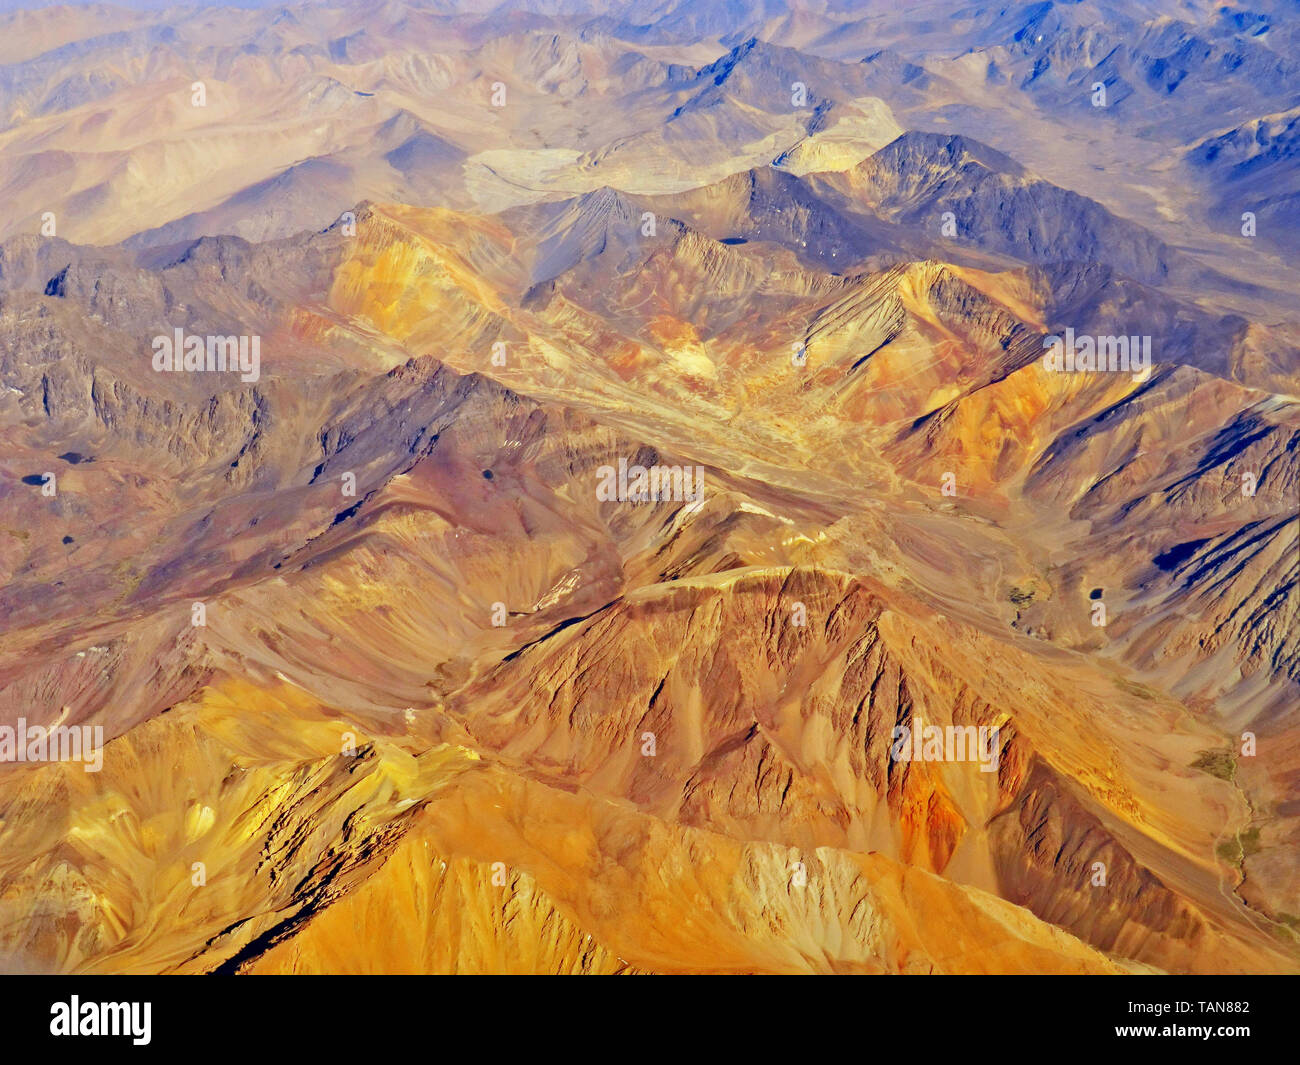 Aerial view of the Andes mountain range with colorful mountains Stock Photo